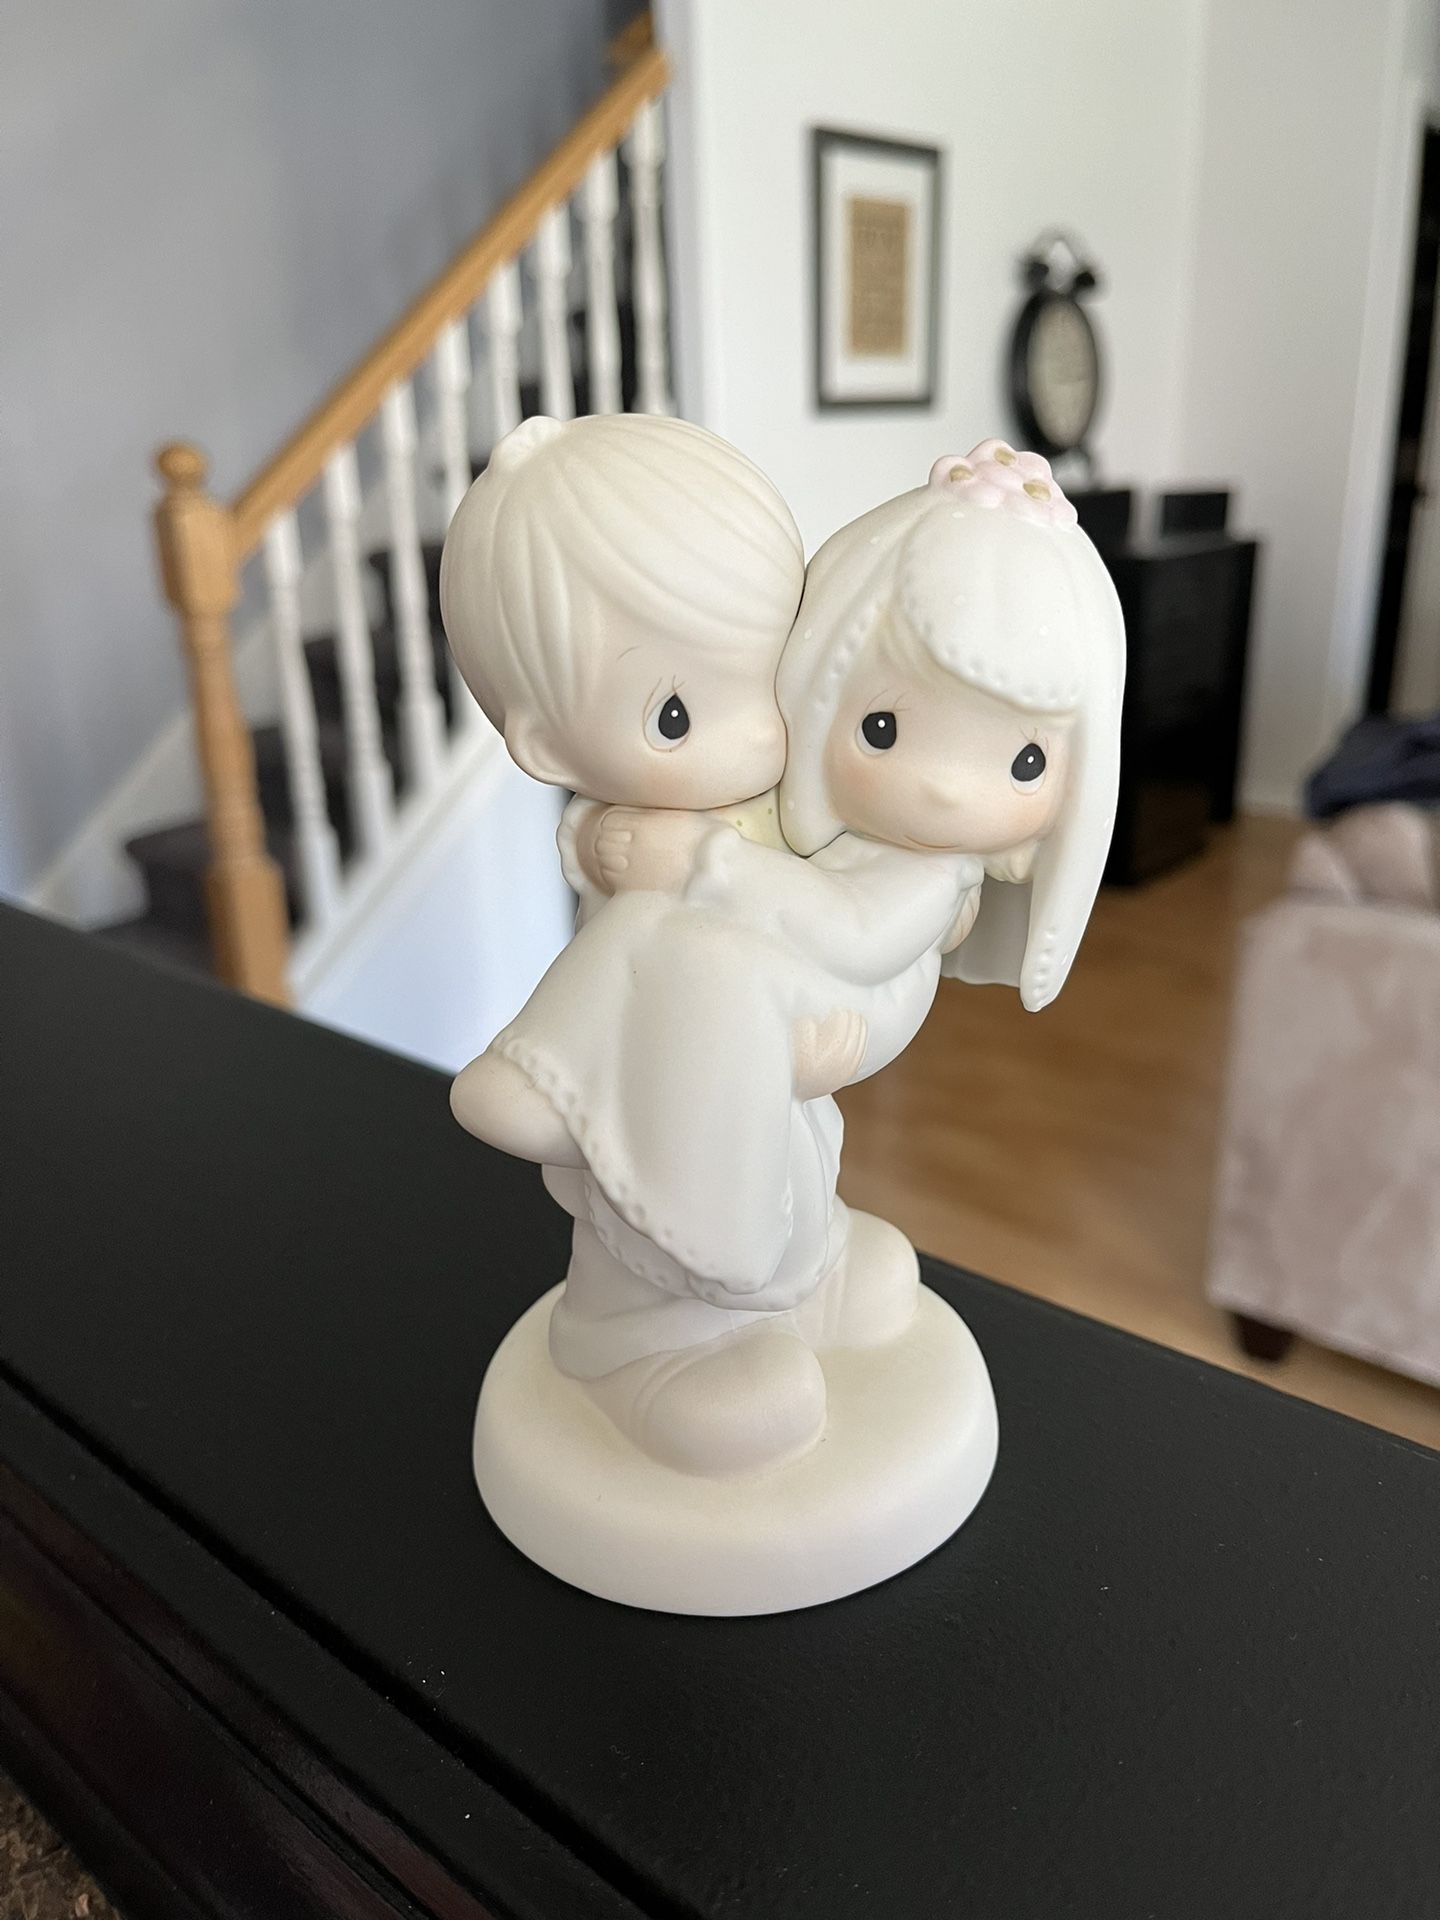 Precious Moments Figurine “Bless You Two”